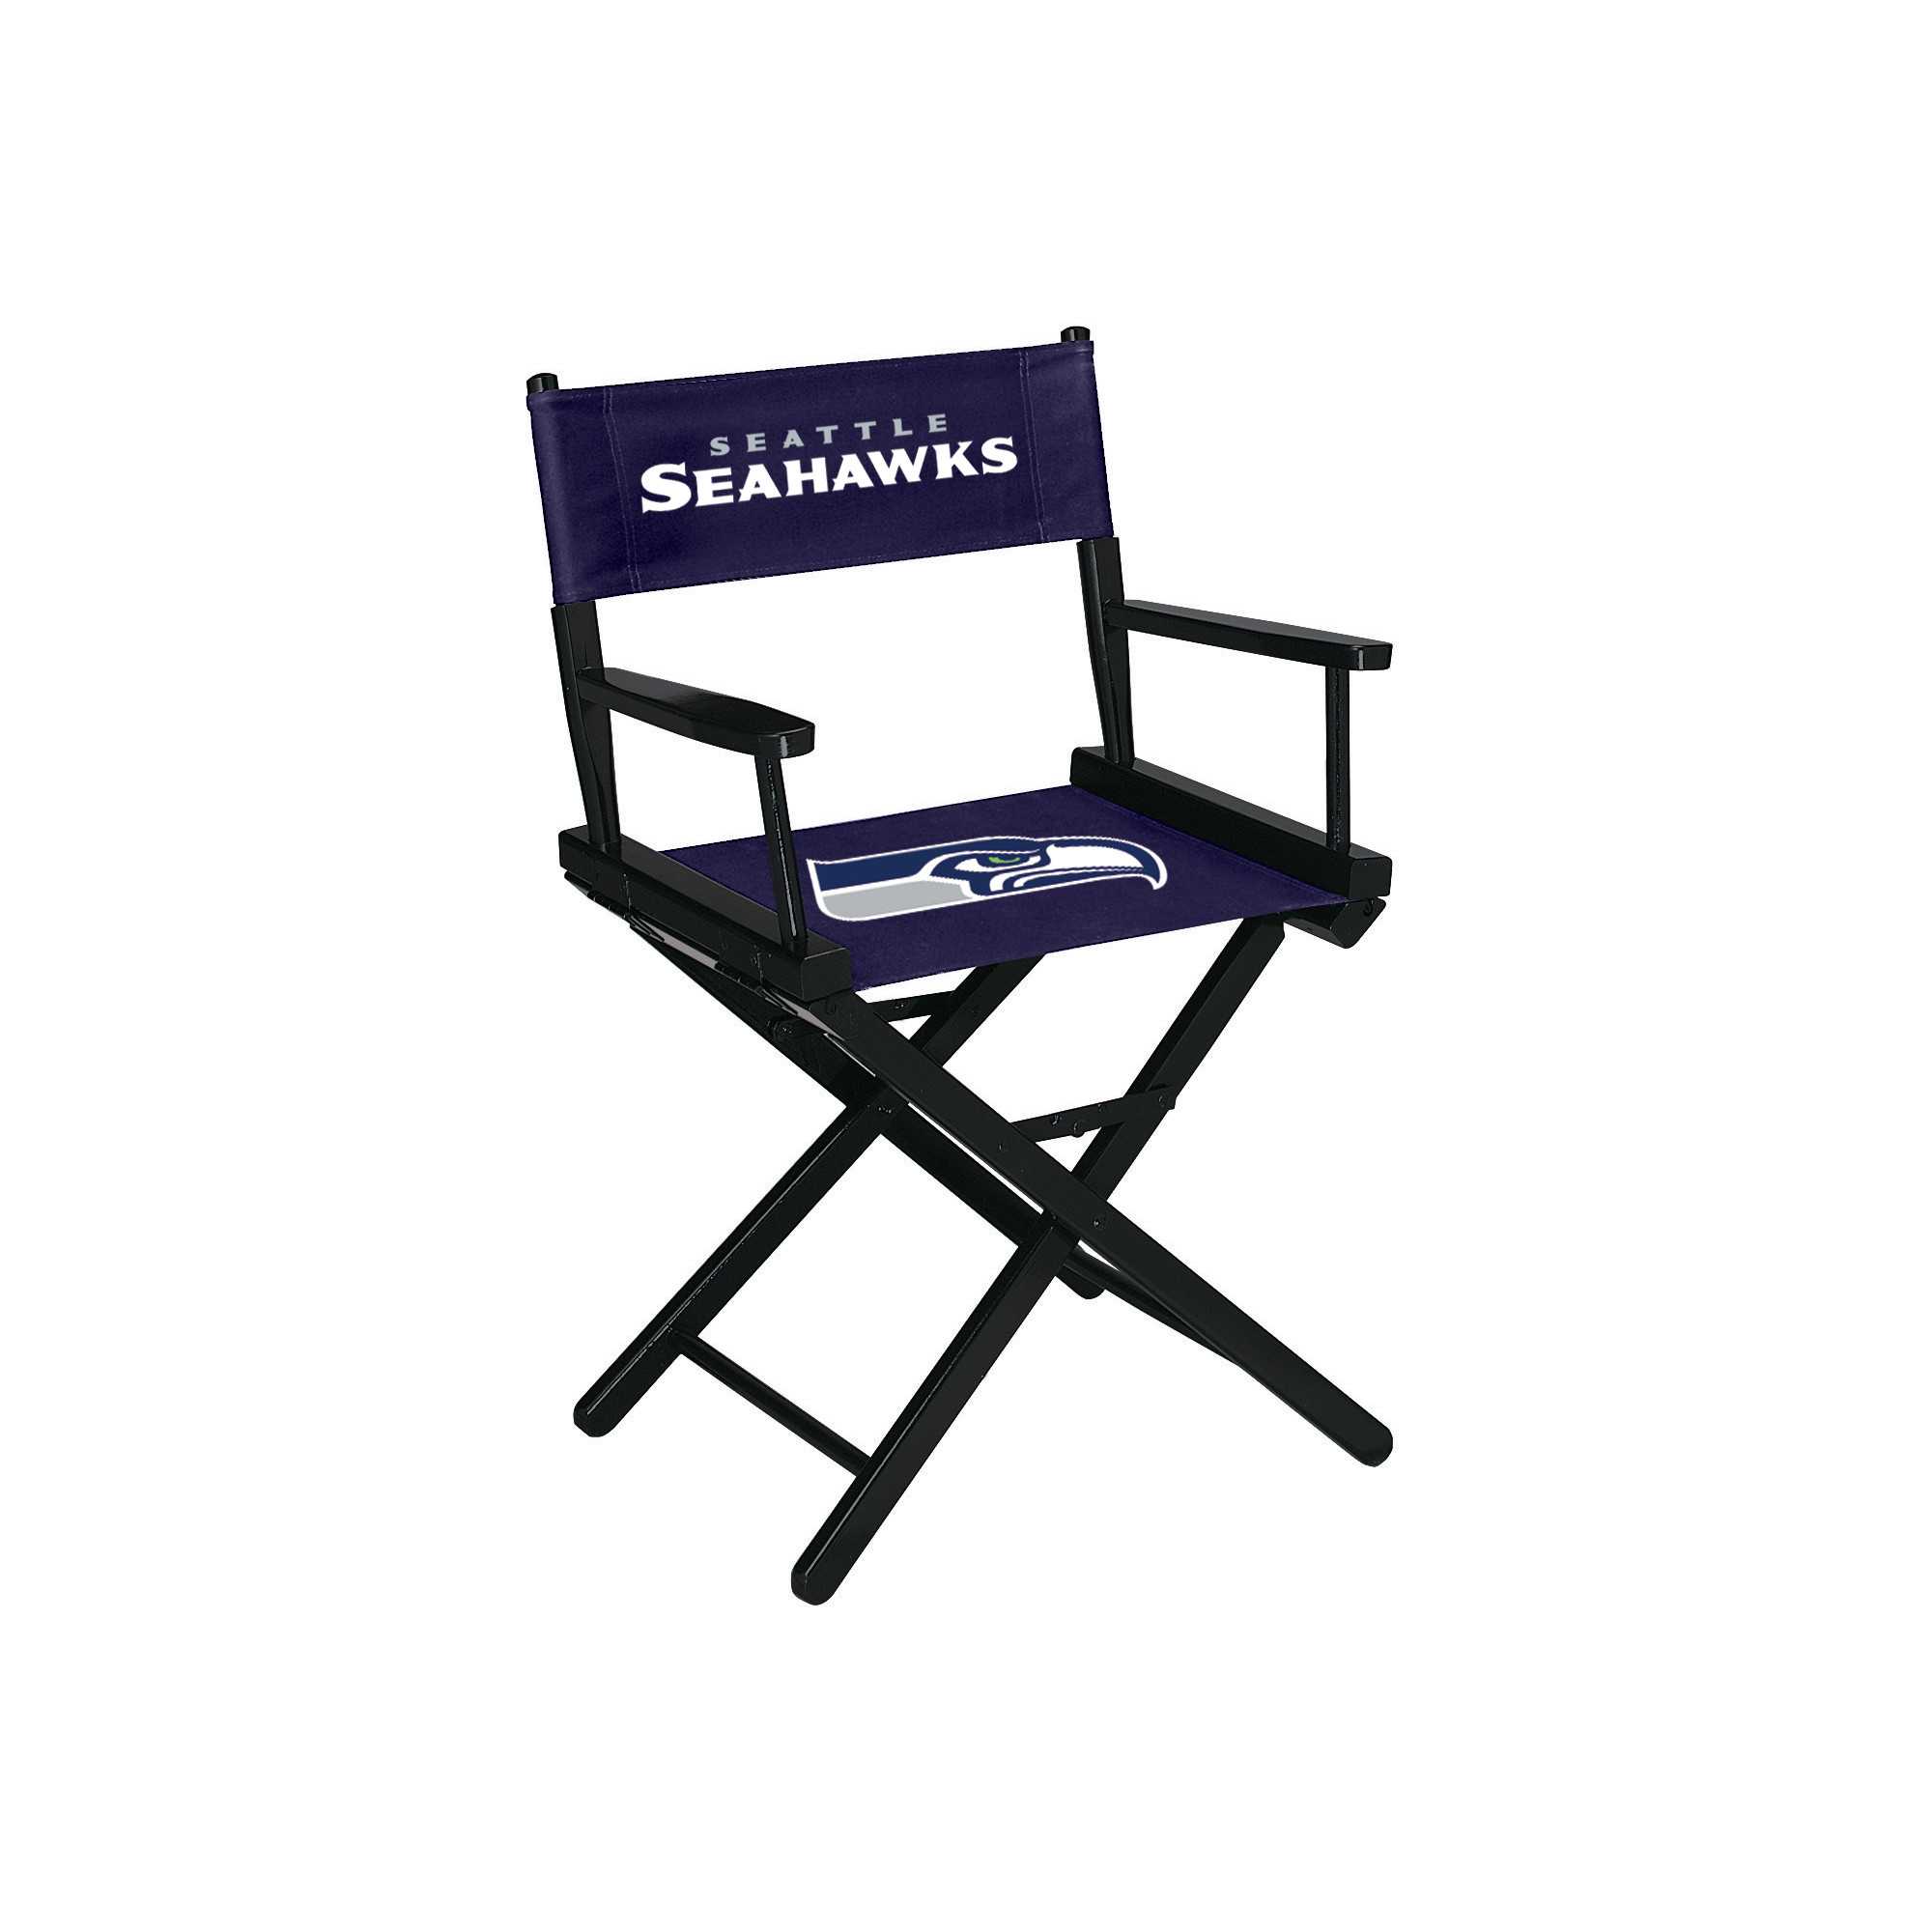 SEATTLE SEAHAWKS TABLE HEIGHT DIRECTORS CHAIR